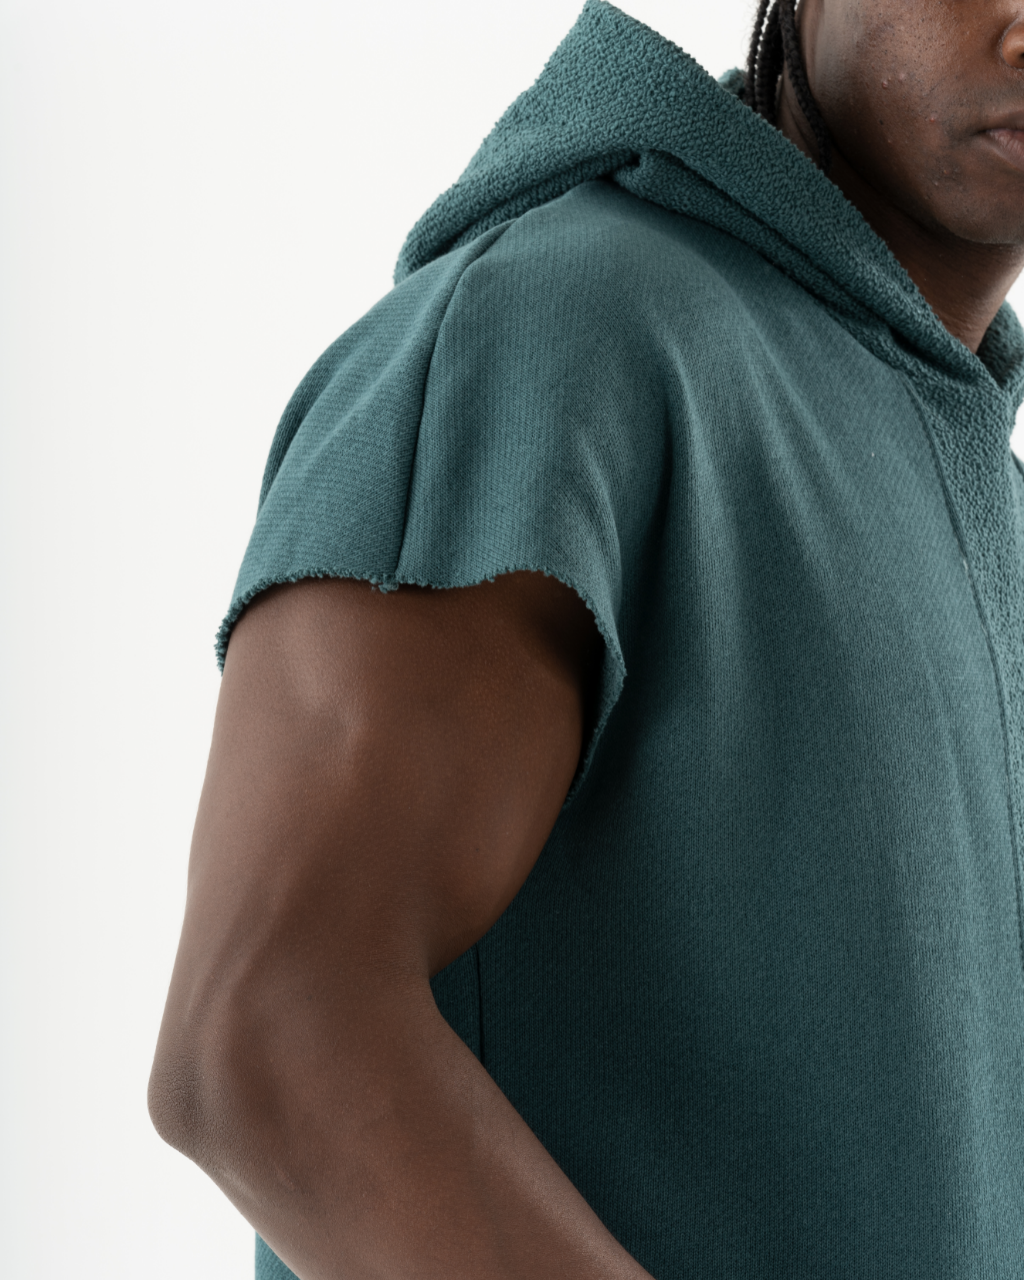 A black man wearing a BACHELOR HOODIE | GREEN with a pouch pocket.